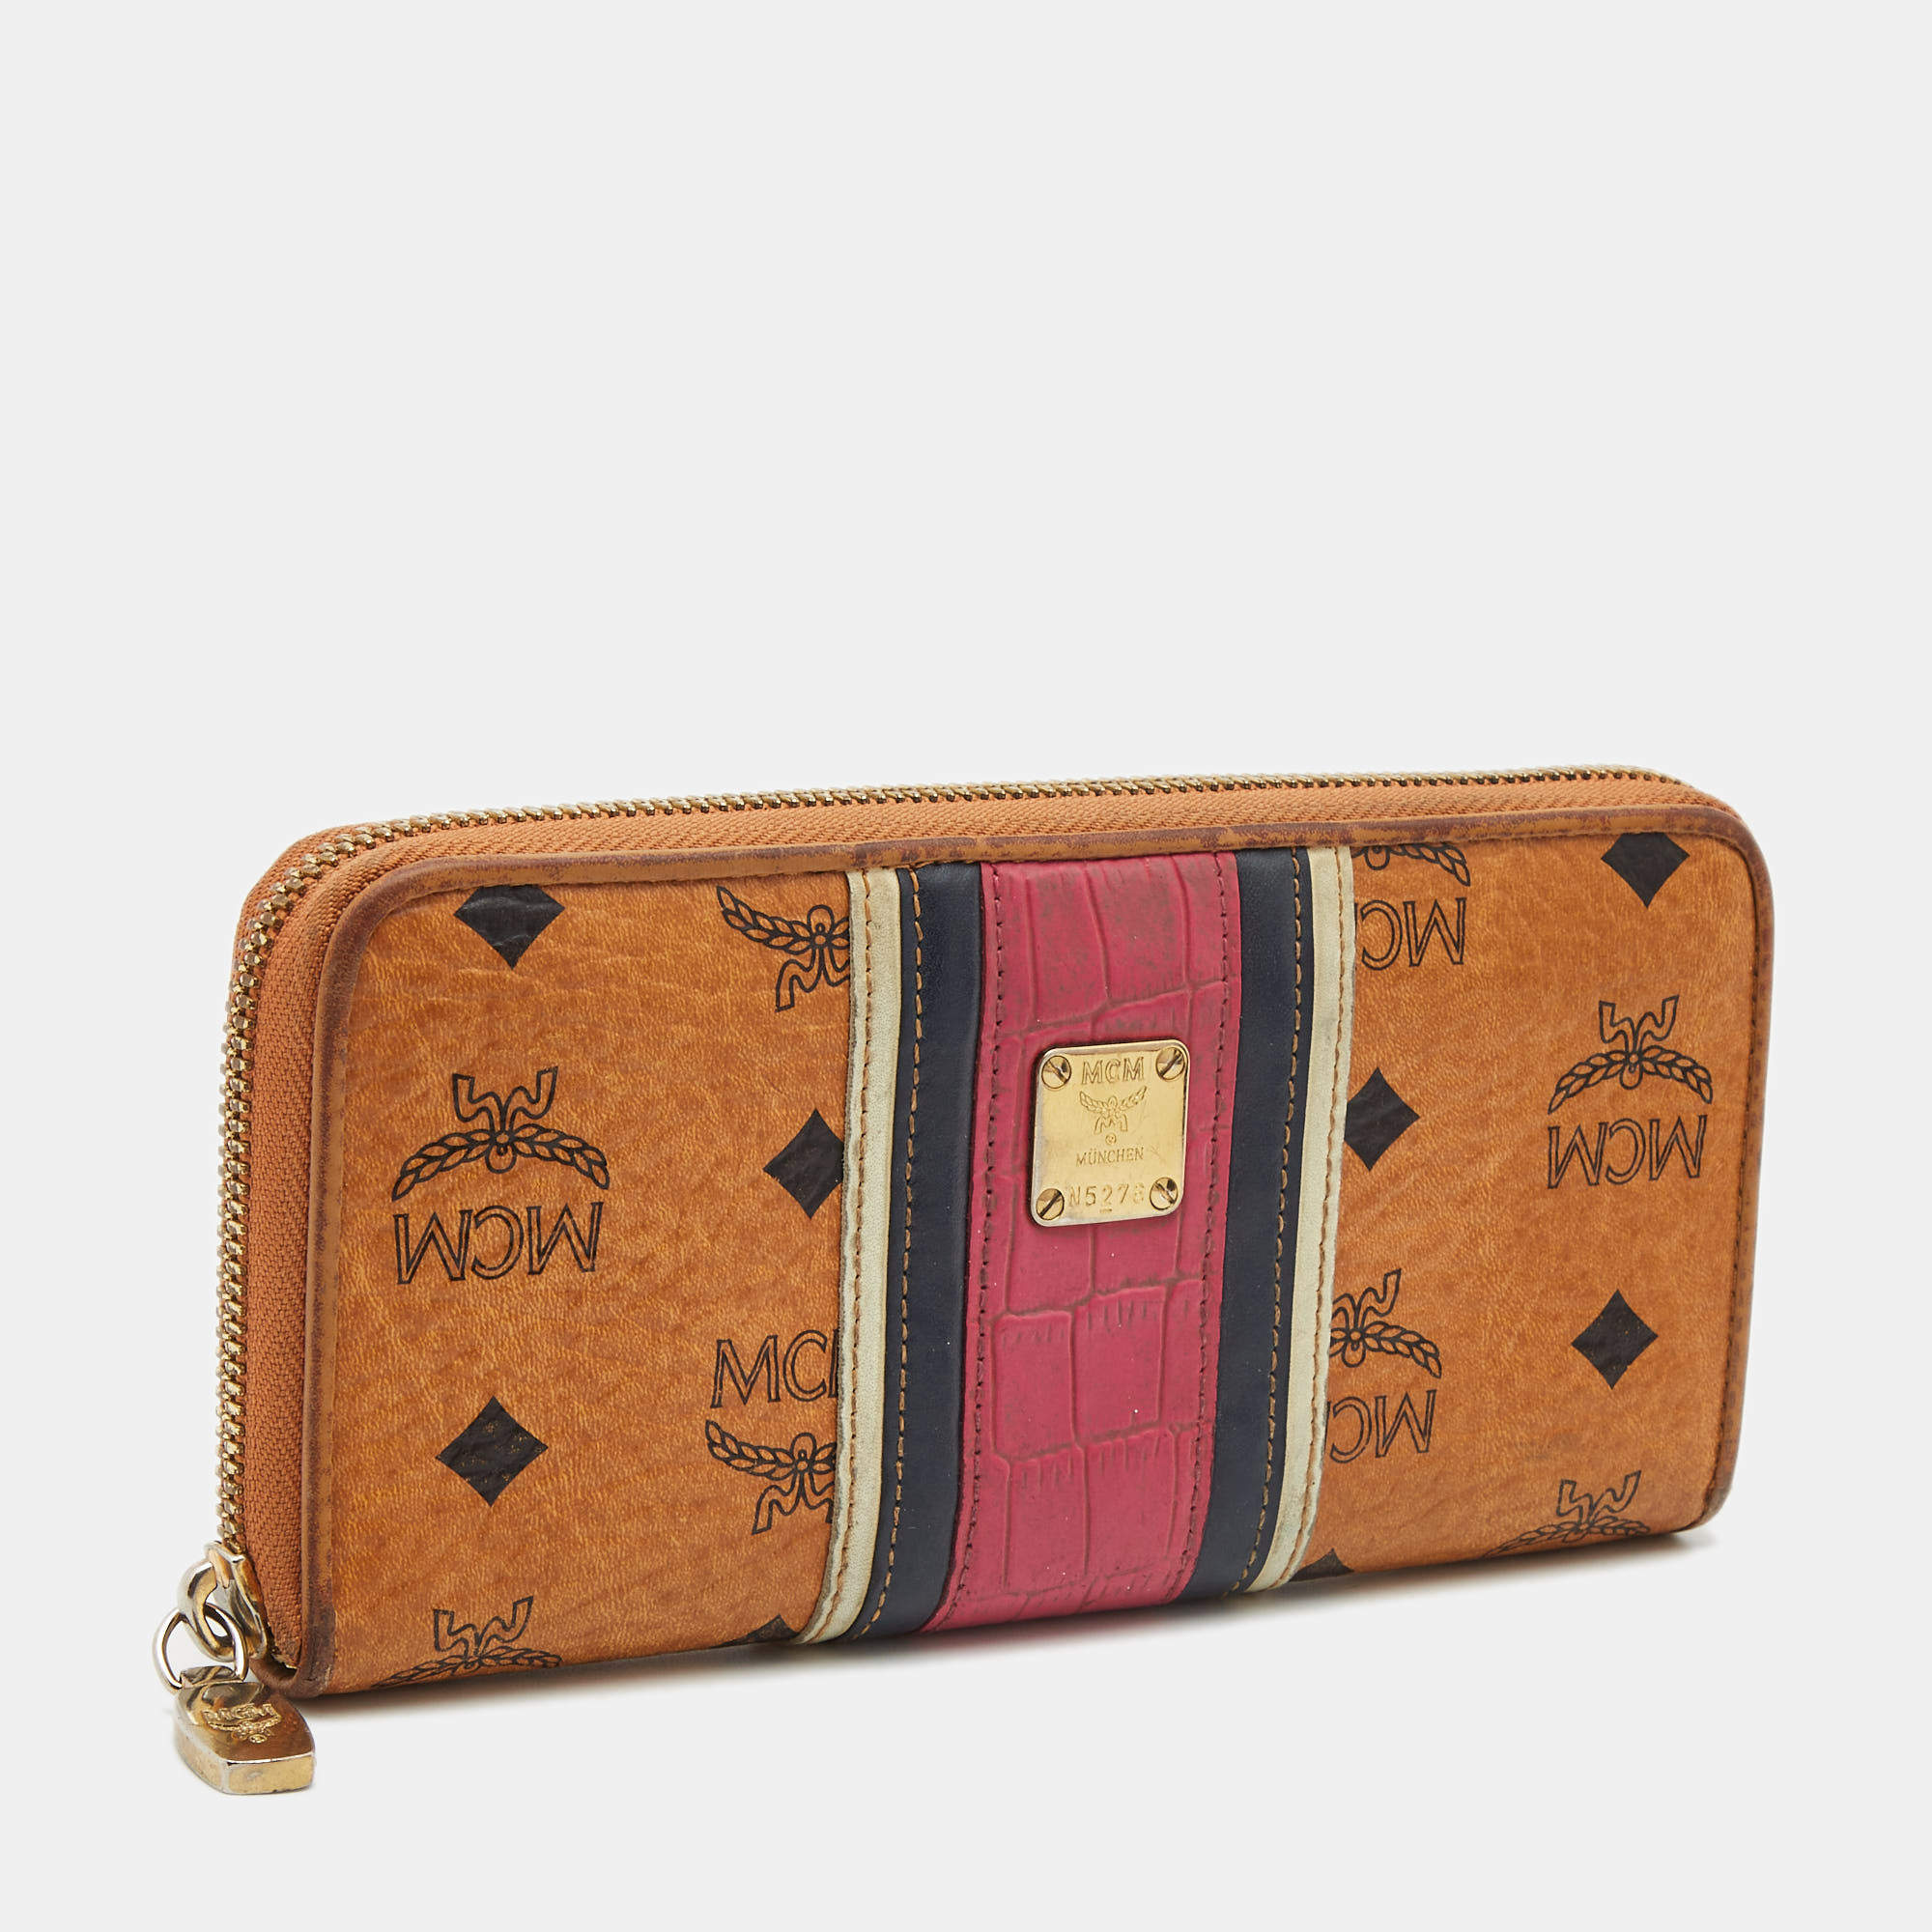 Mcm Leather Wallet 